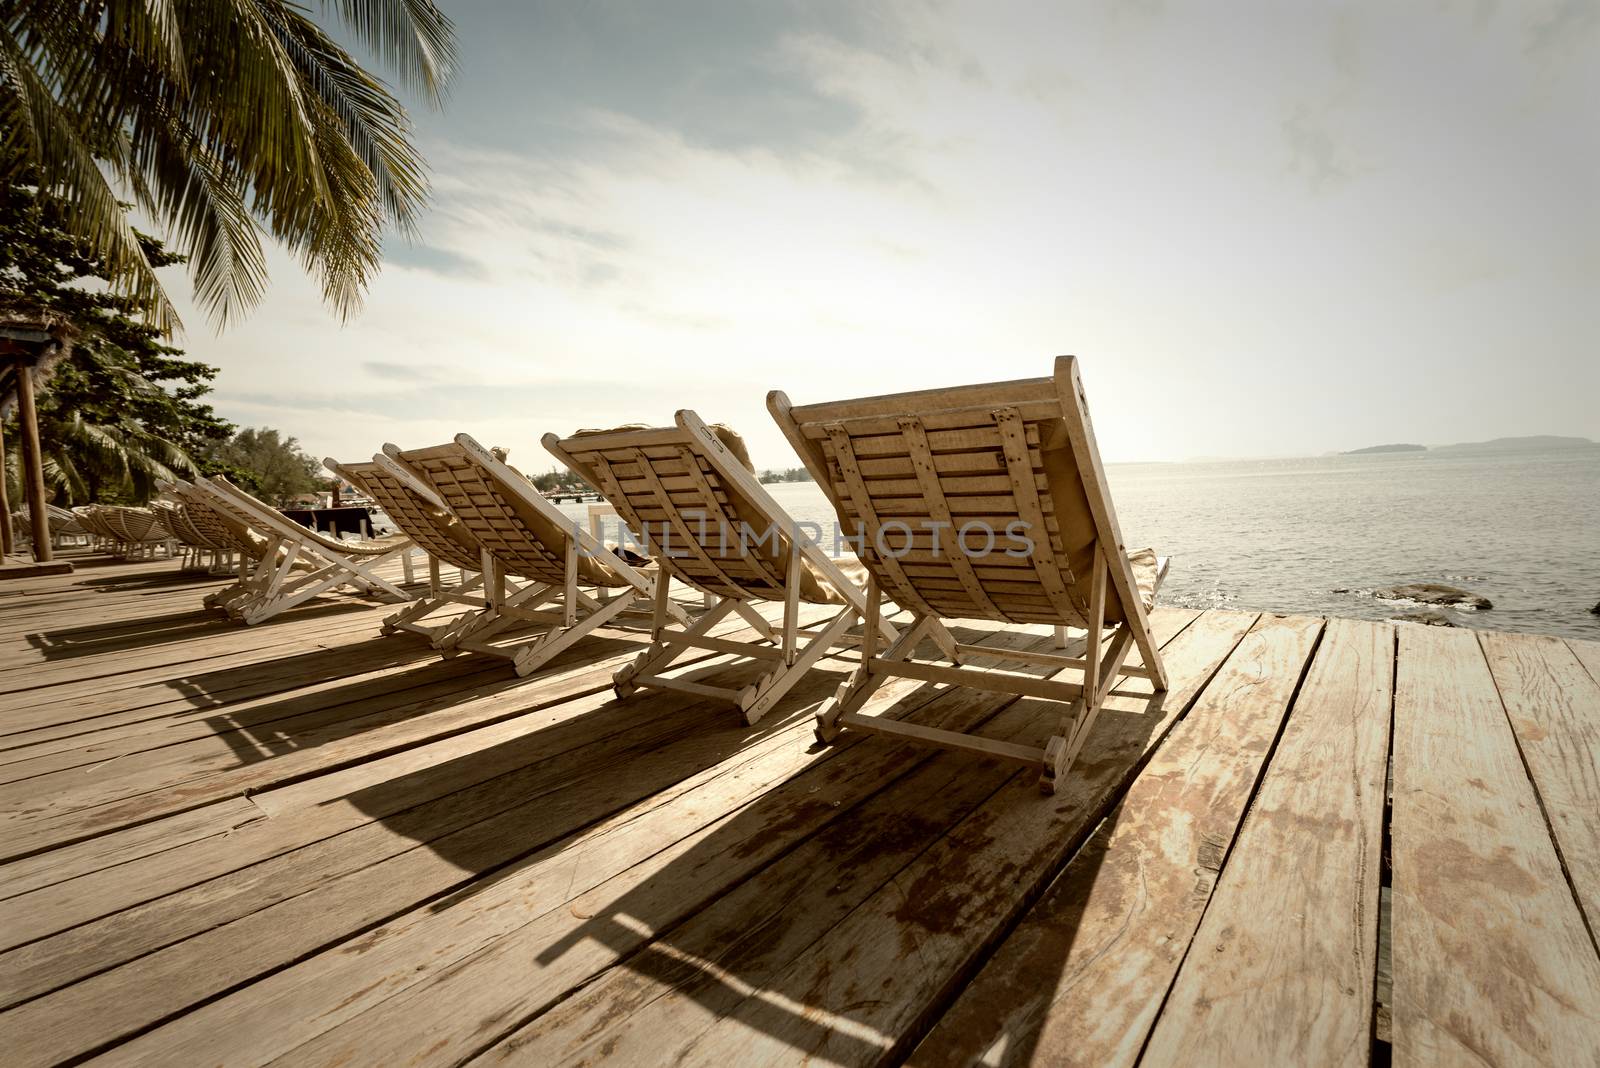 Vacation Concept. Palms and relaxing sunbeds on wooden desk near the sea under blue sky. Sepia toned